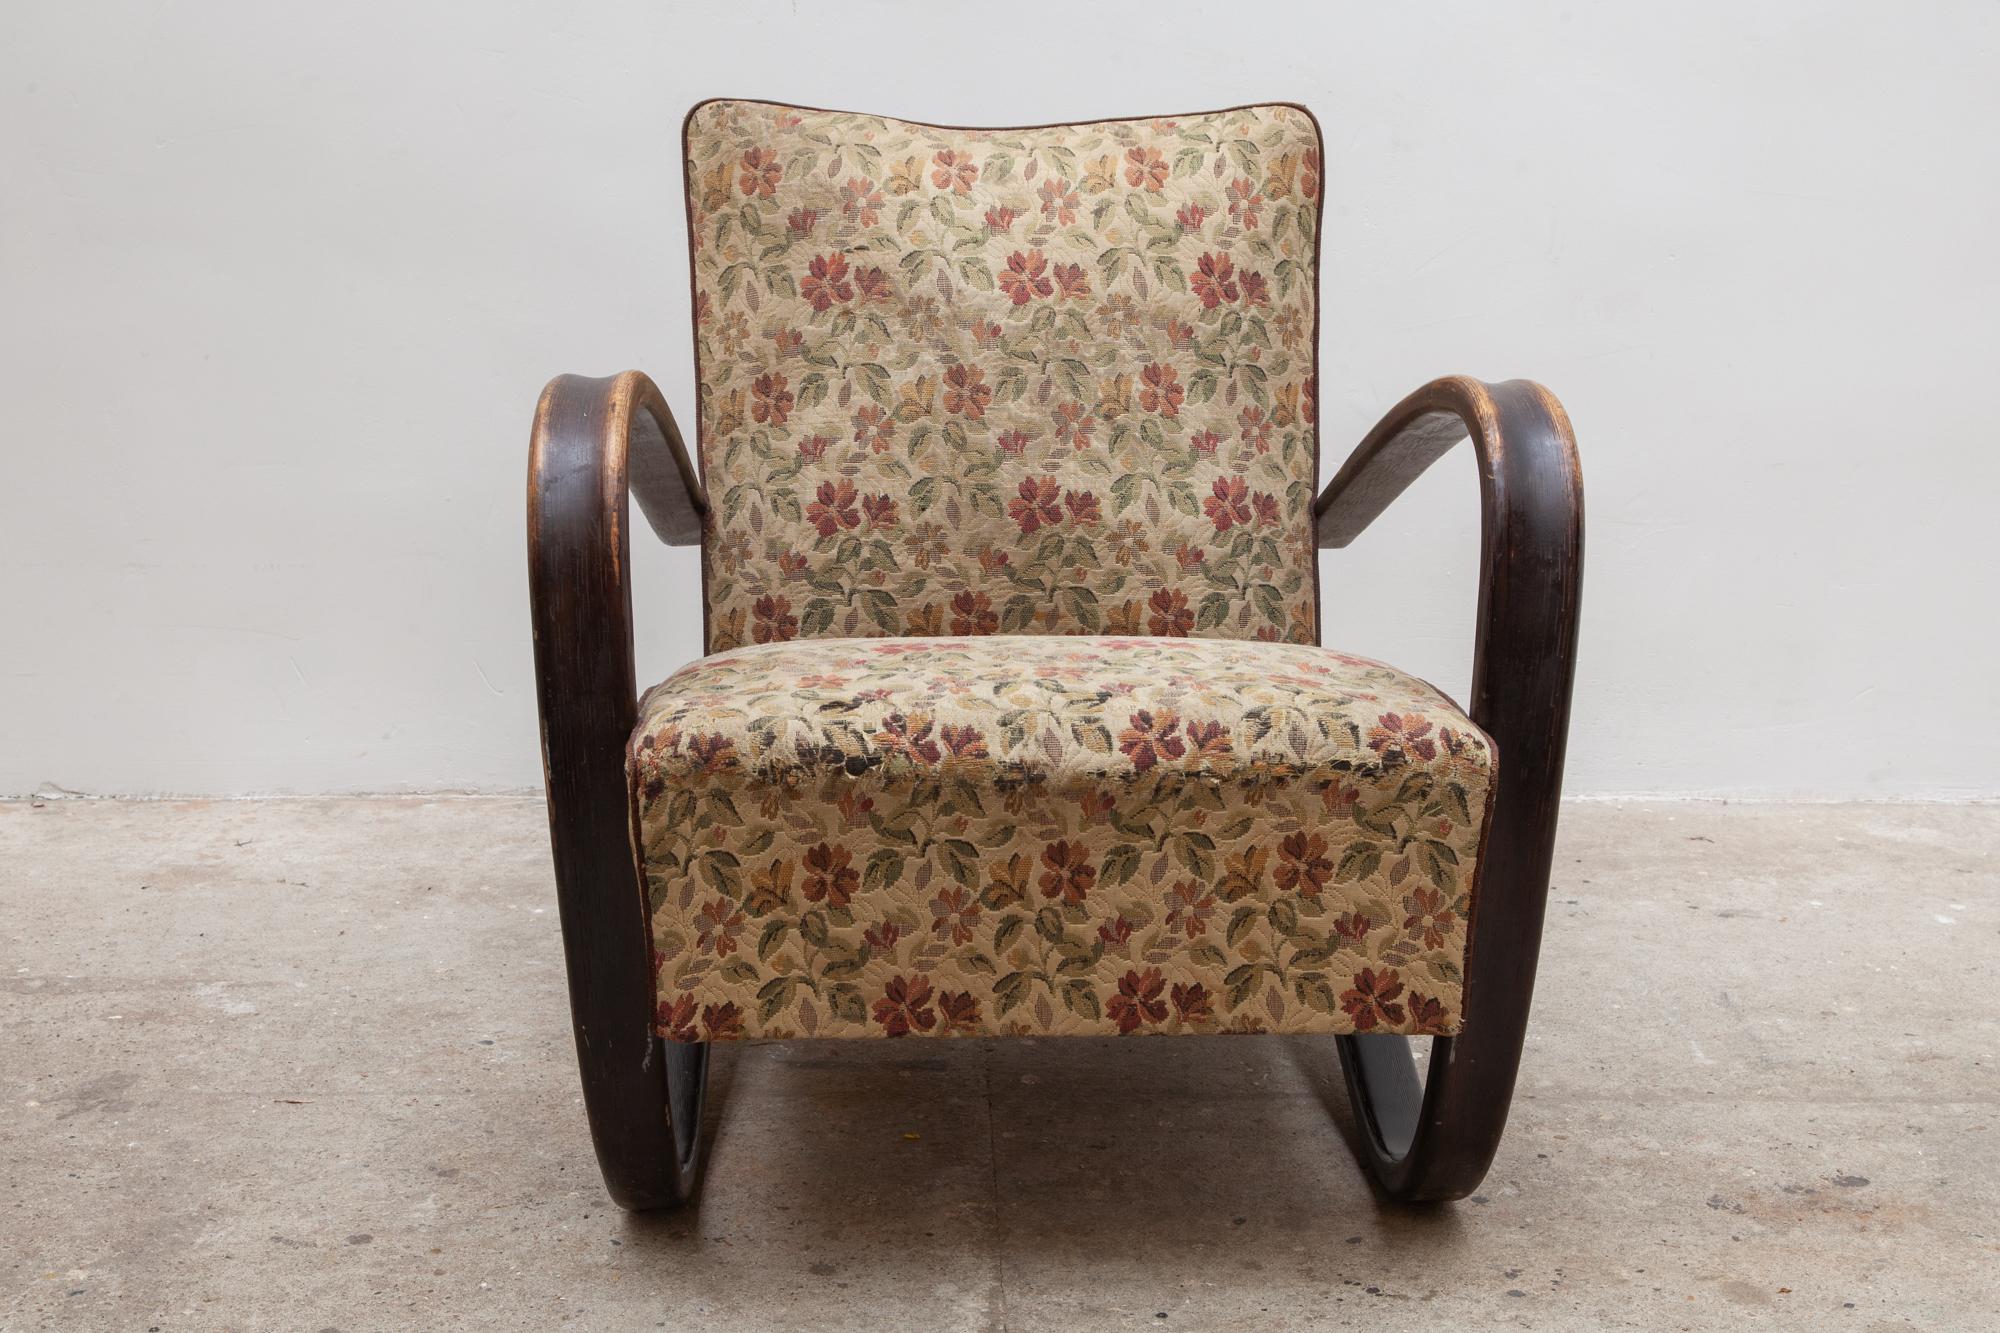 Art Deco 1930s beech bentwood lounge armchairs chairs with beautiful sculptural wooden arms. Original Flower pattern upholstery.
Dimensions: 65 W x 80 H x 90 D cm, seat 35 cm high.